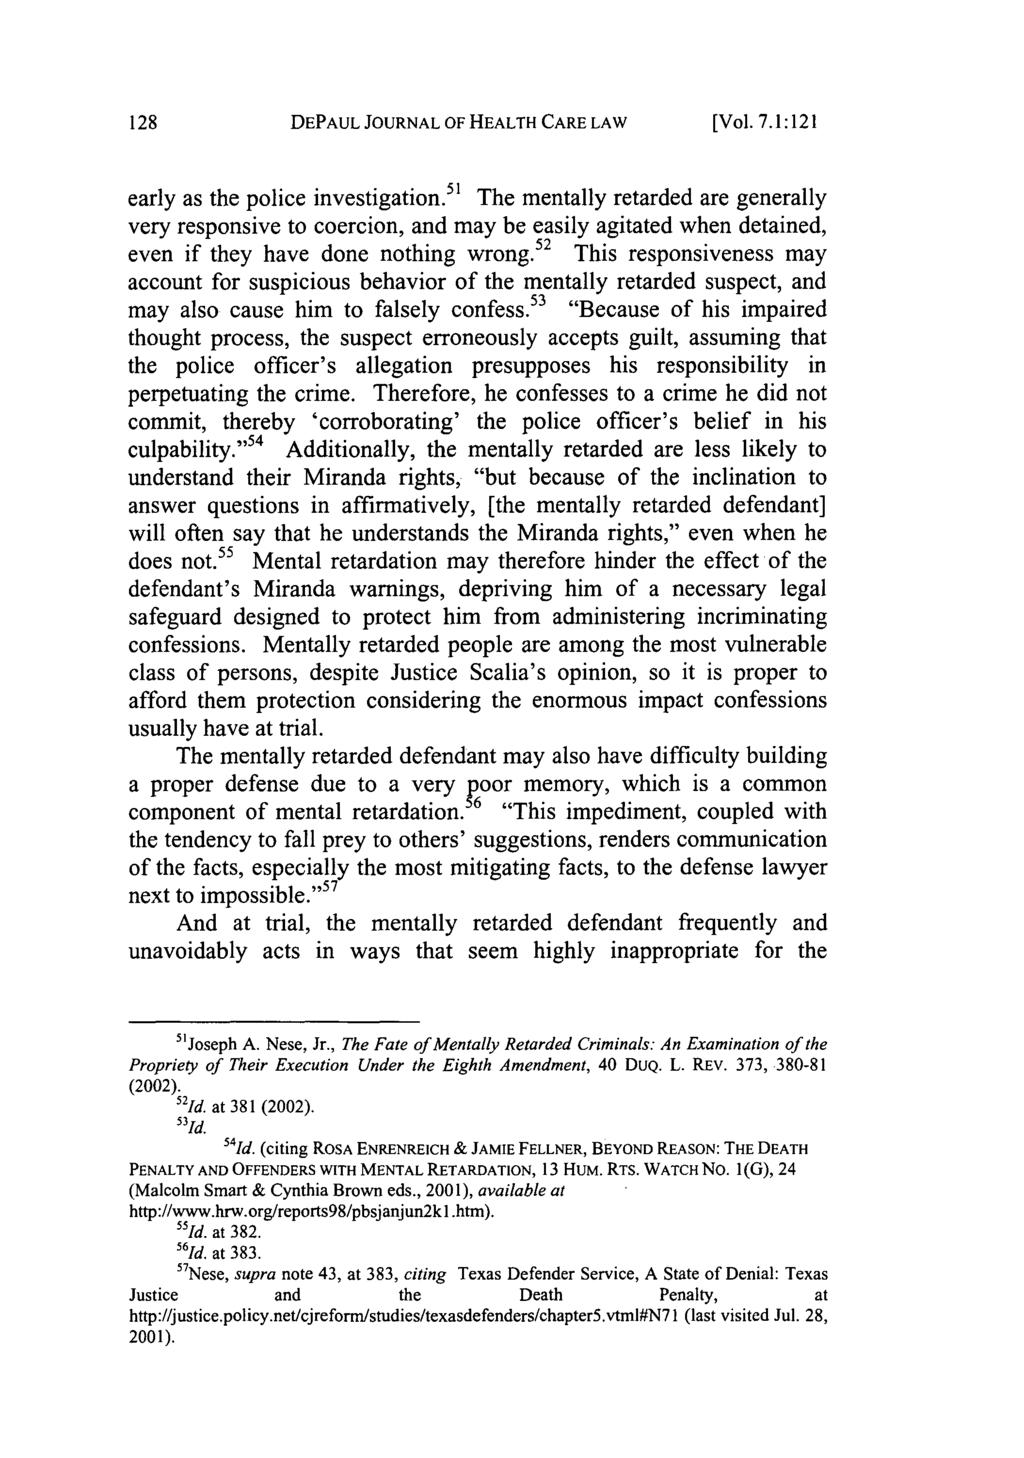 DEPAUL JOURNAL OF HEALTH CARE LAW [Vol. 7.1:121 early as the police investigation.